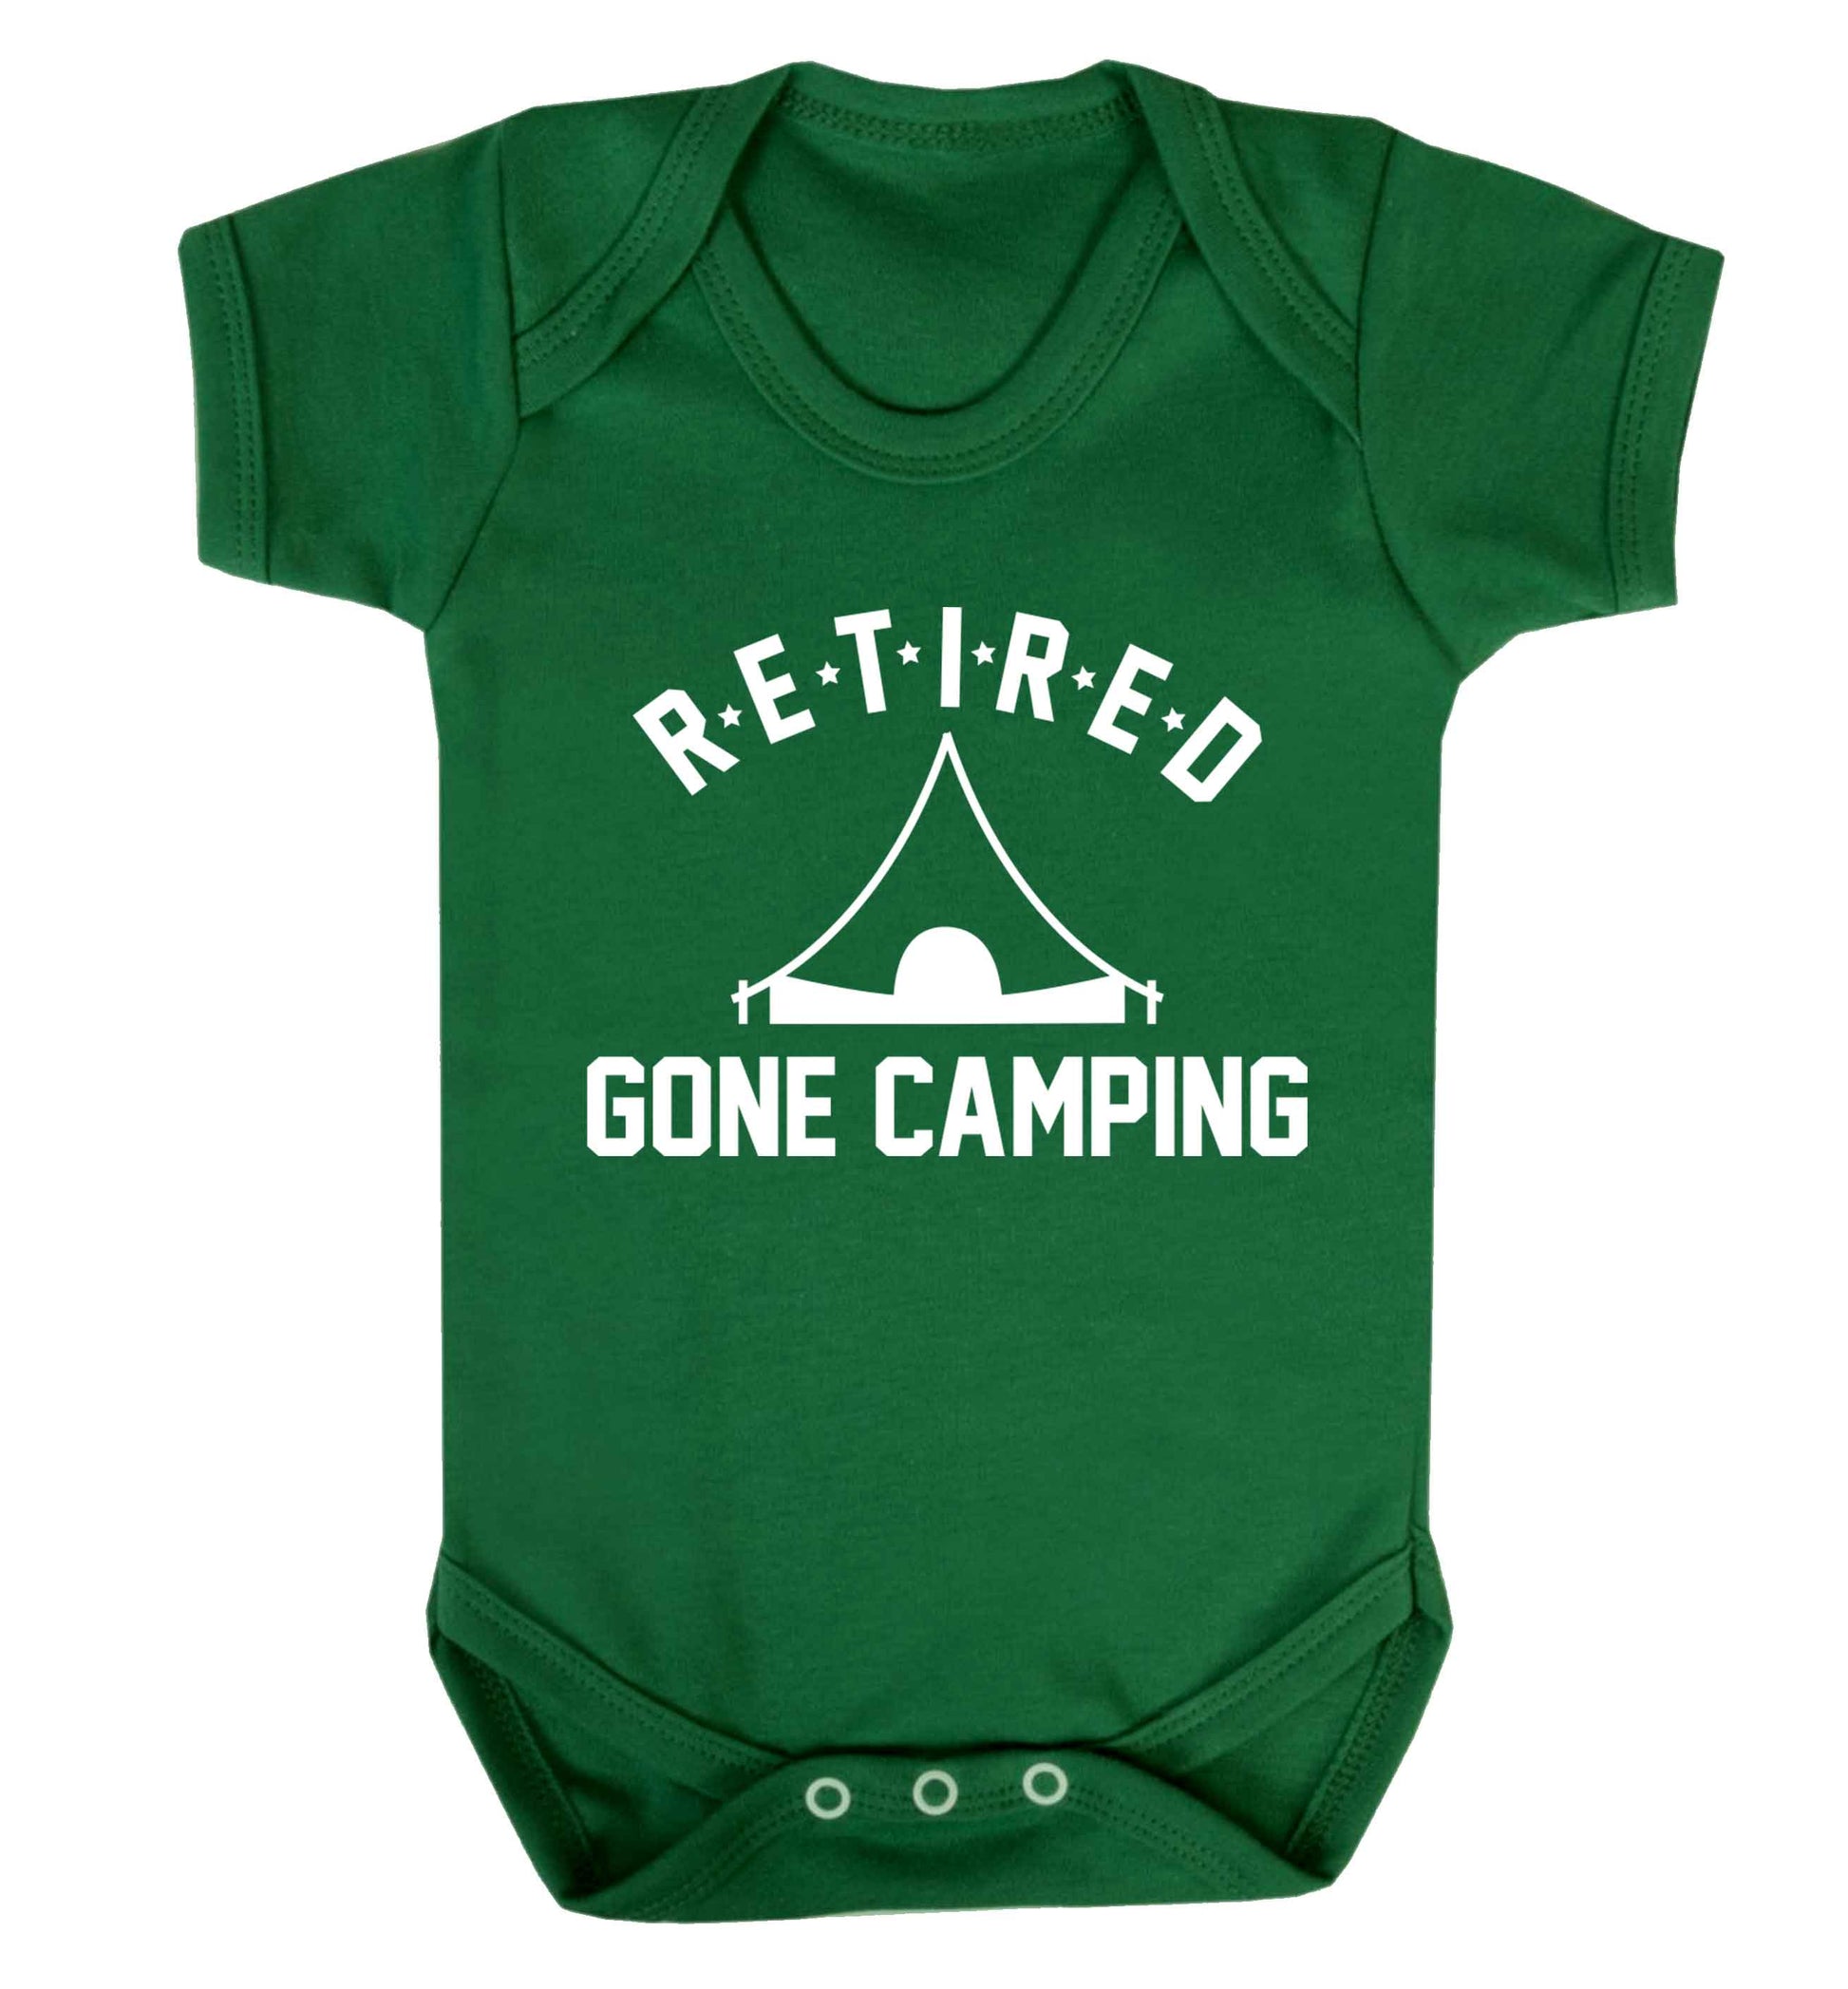 Retired gone camping Baby Vest green 18-24 months